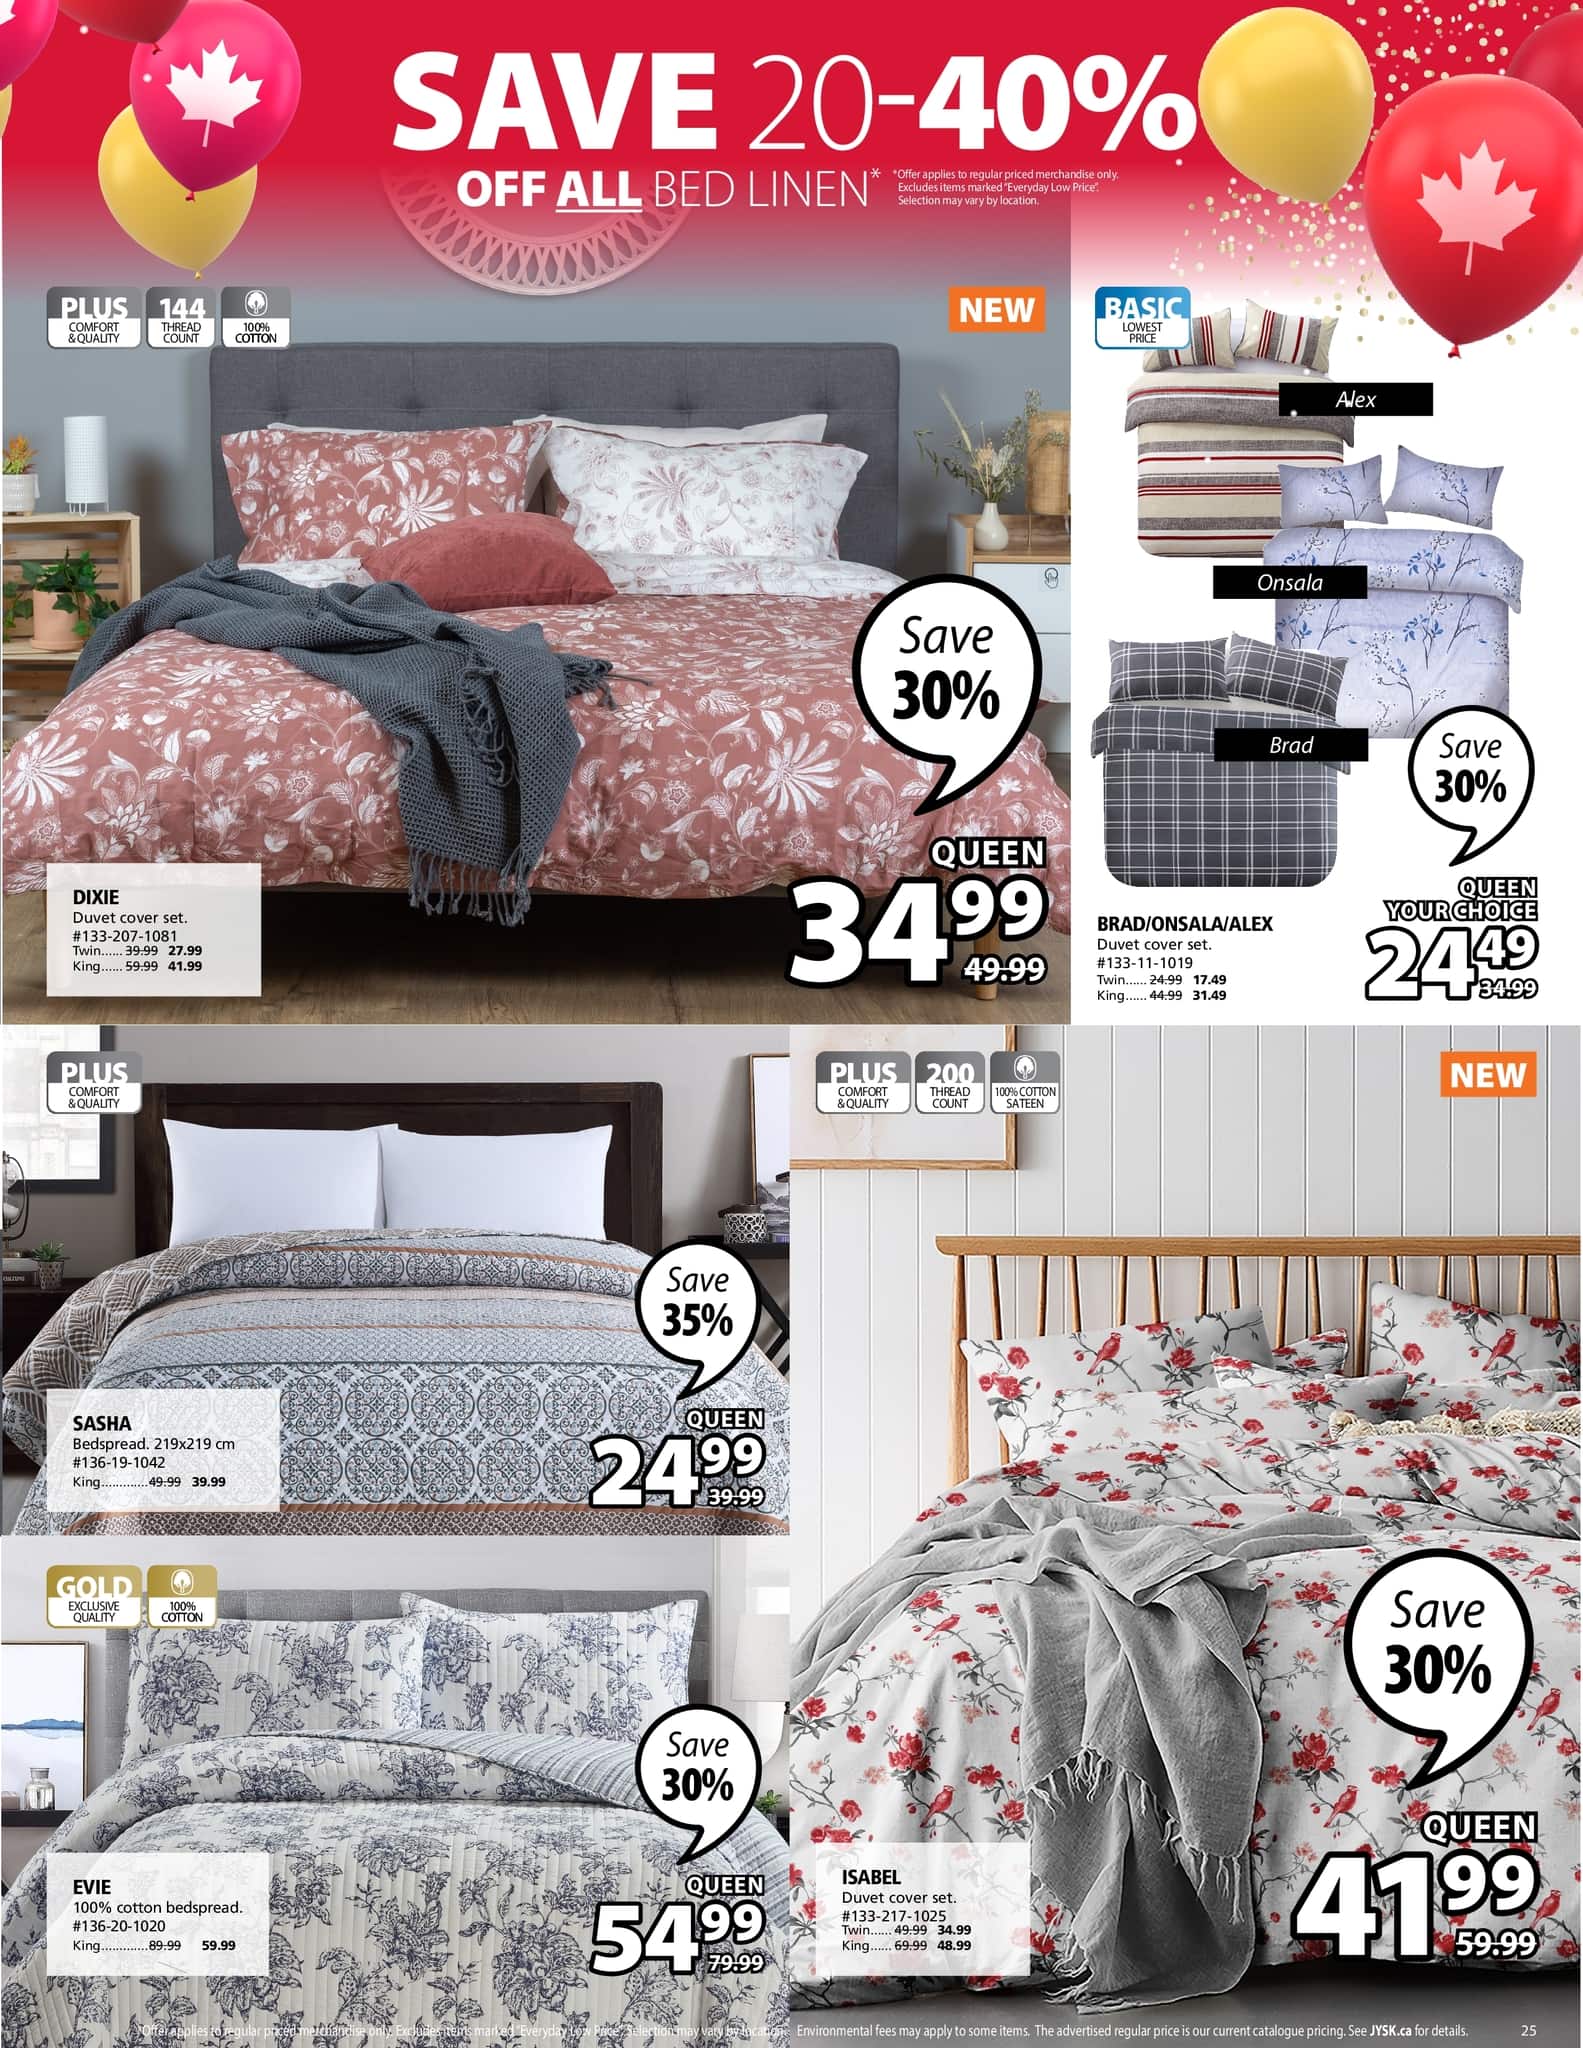 Jysk - Weekly Flyer Specials - Page 25